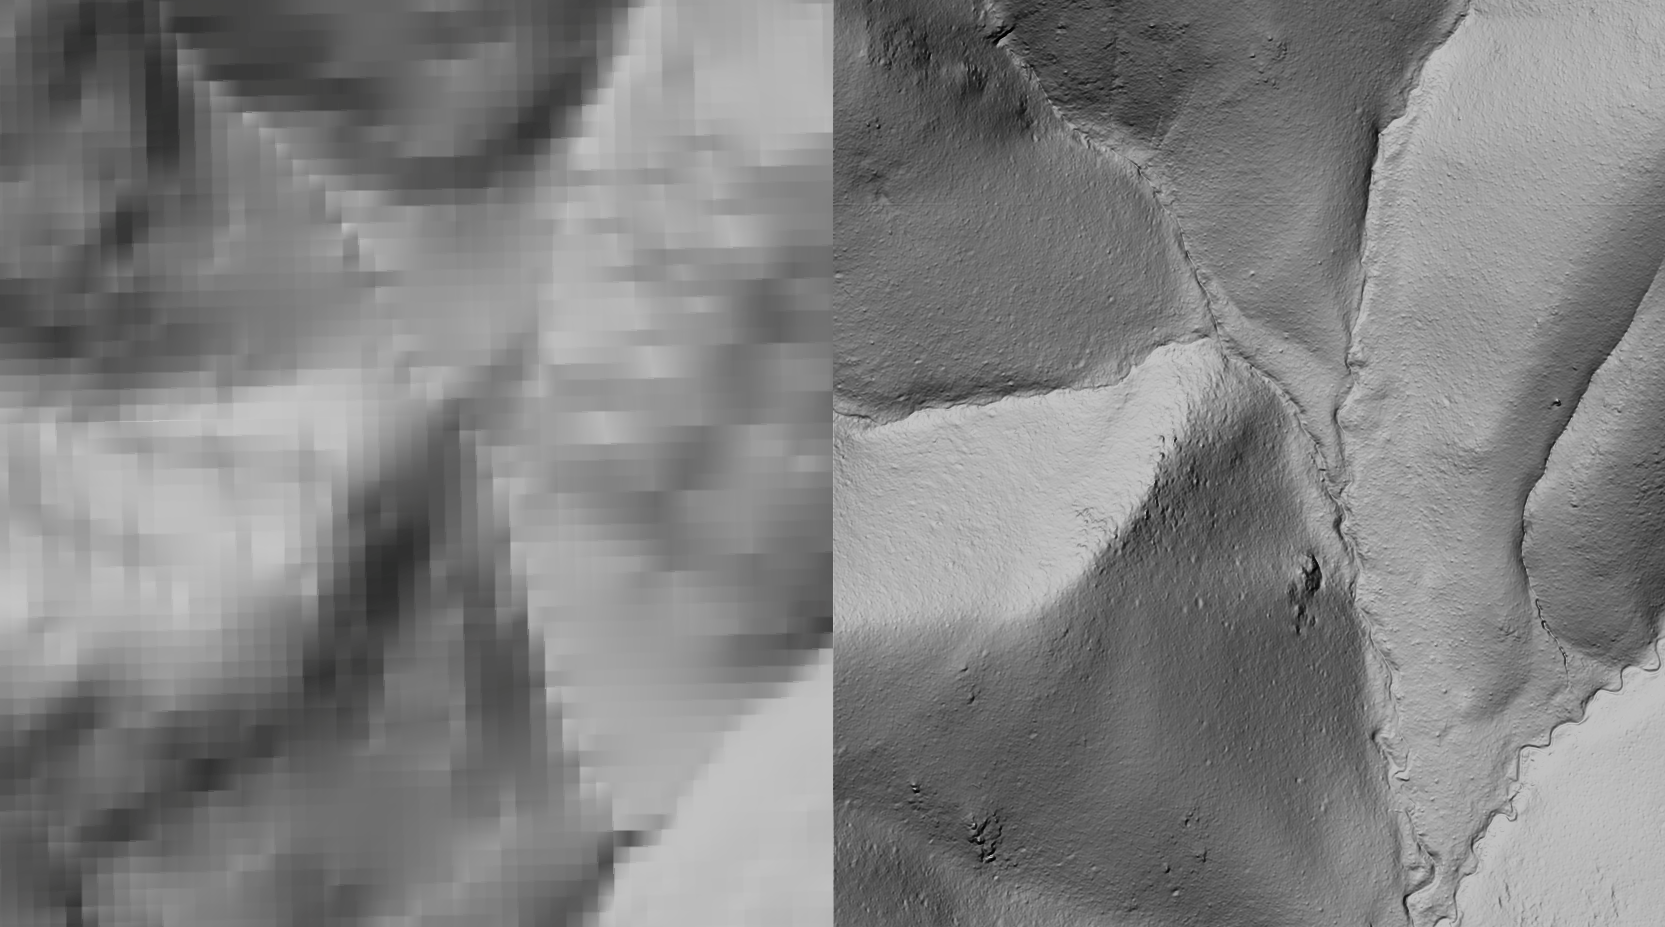 The image is split vertically into two halves. In shades of grey, the right hand side shows the resolution of a 10 m digital elevation model of an area of land and is heavily pixelated. The right hand side, also in shades of grey, shows the same area but at a 50 cm resolution with much clearer and nuanced contours for each slope.